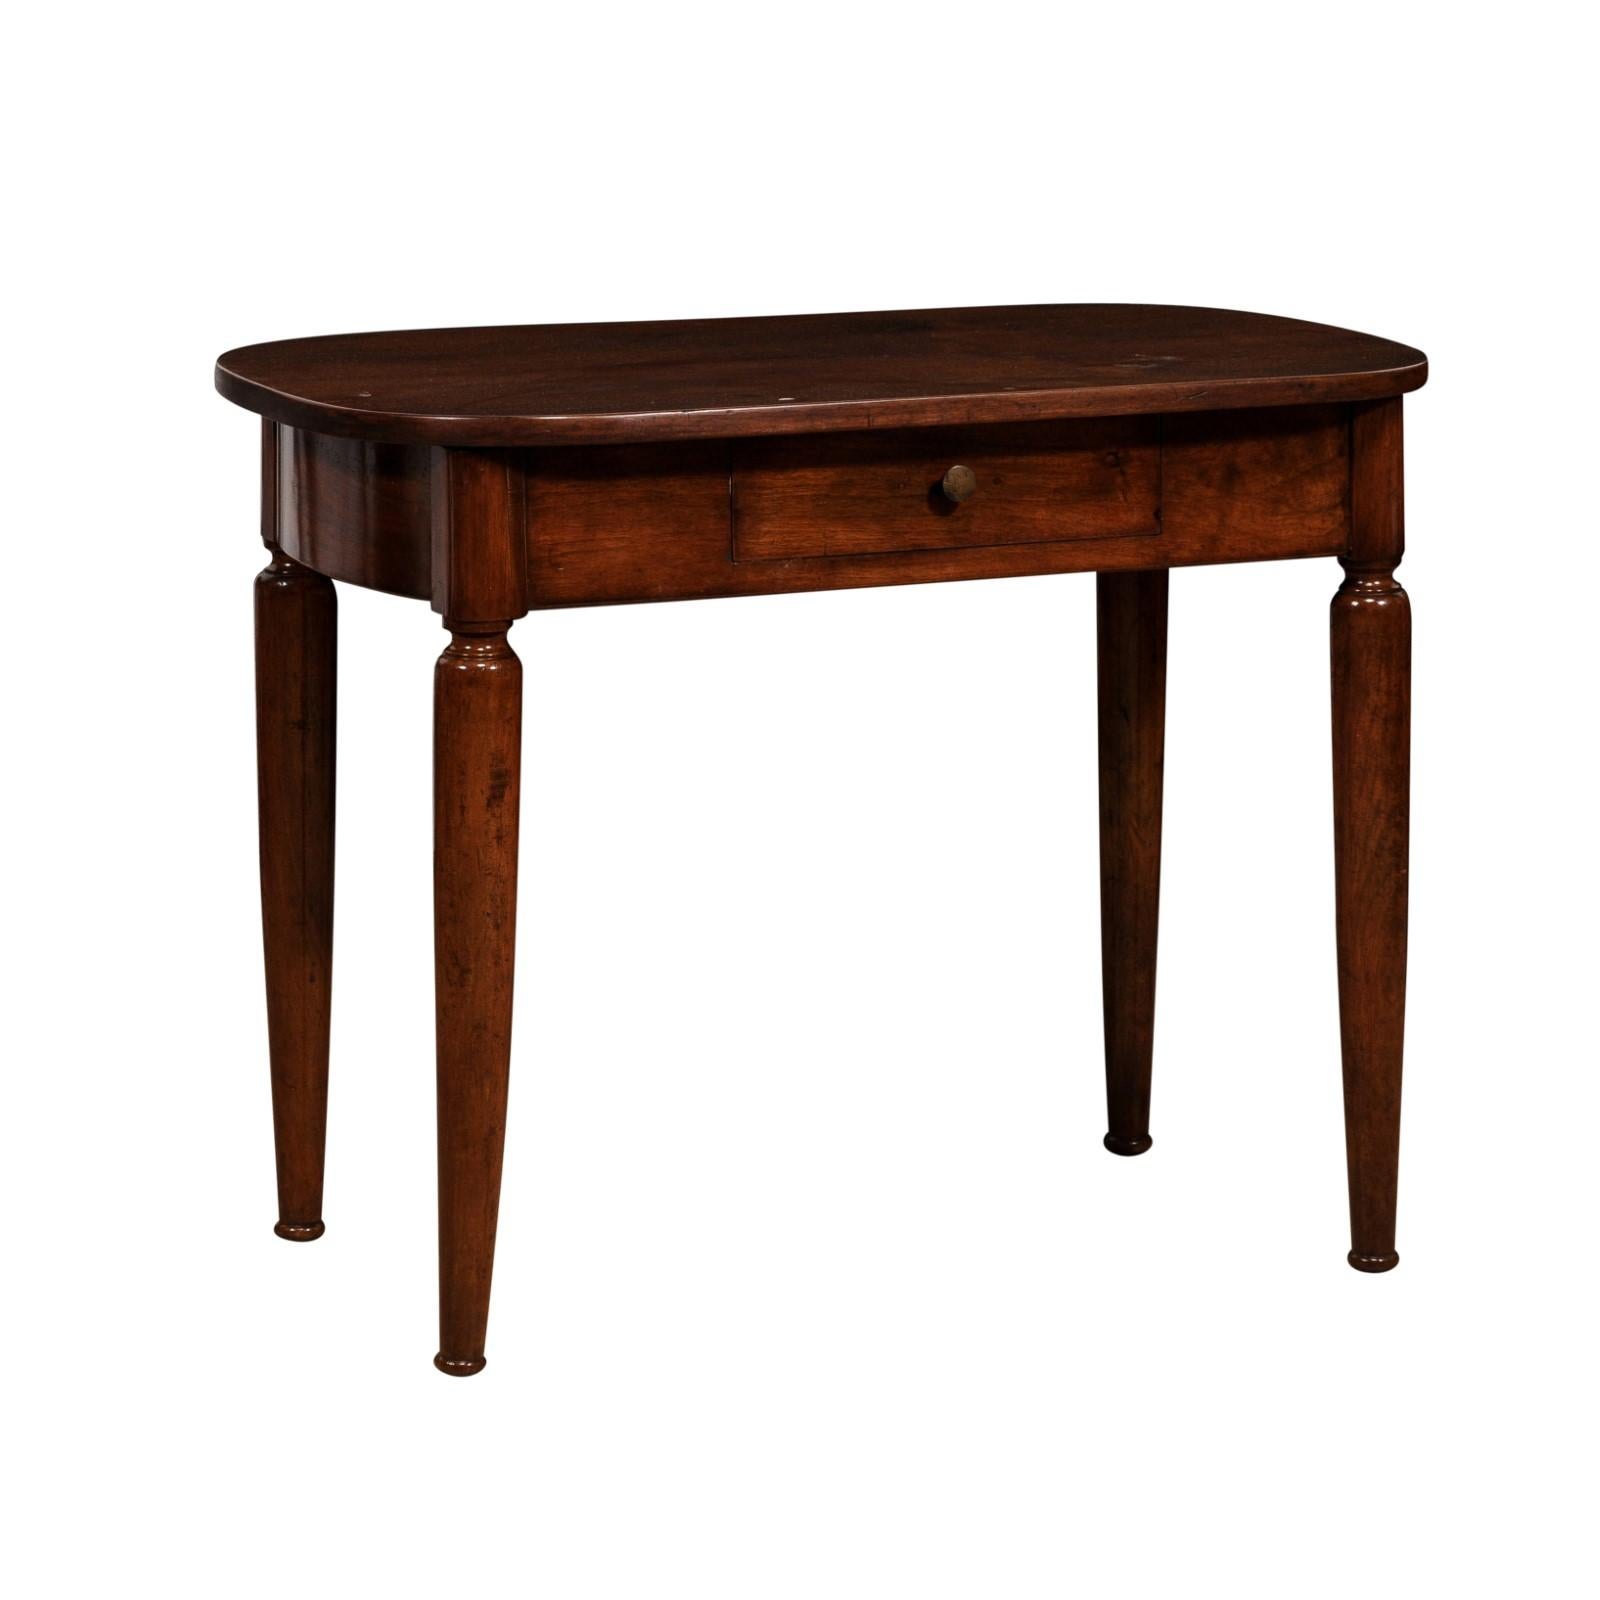 An Italian walnut side table from circa 1890 with oval top, single drawer and cylindrical tapering legs. This Italian walnut side table, dating back to approximately 1890, exudes timeless elegance and craftsmanship. Its oval top showcases the